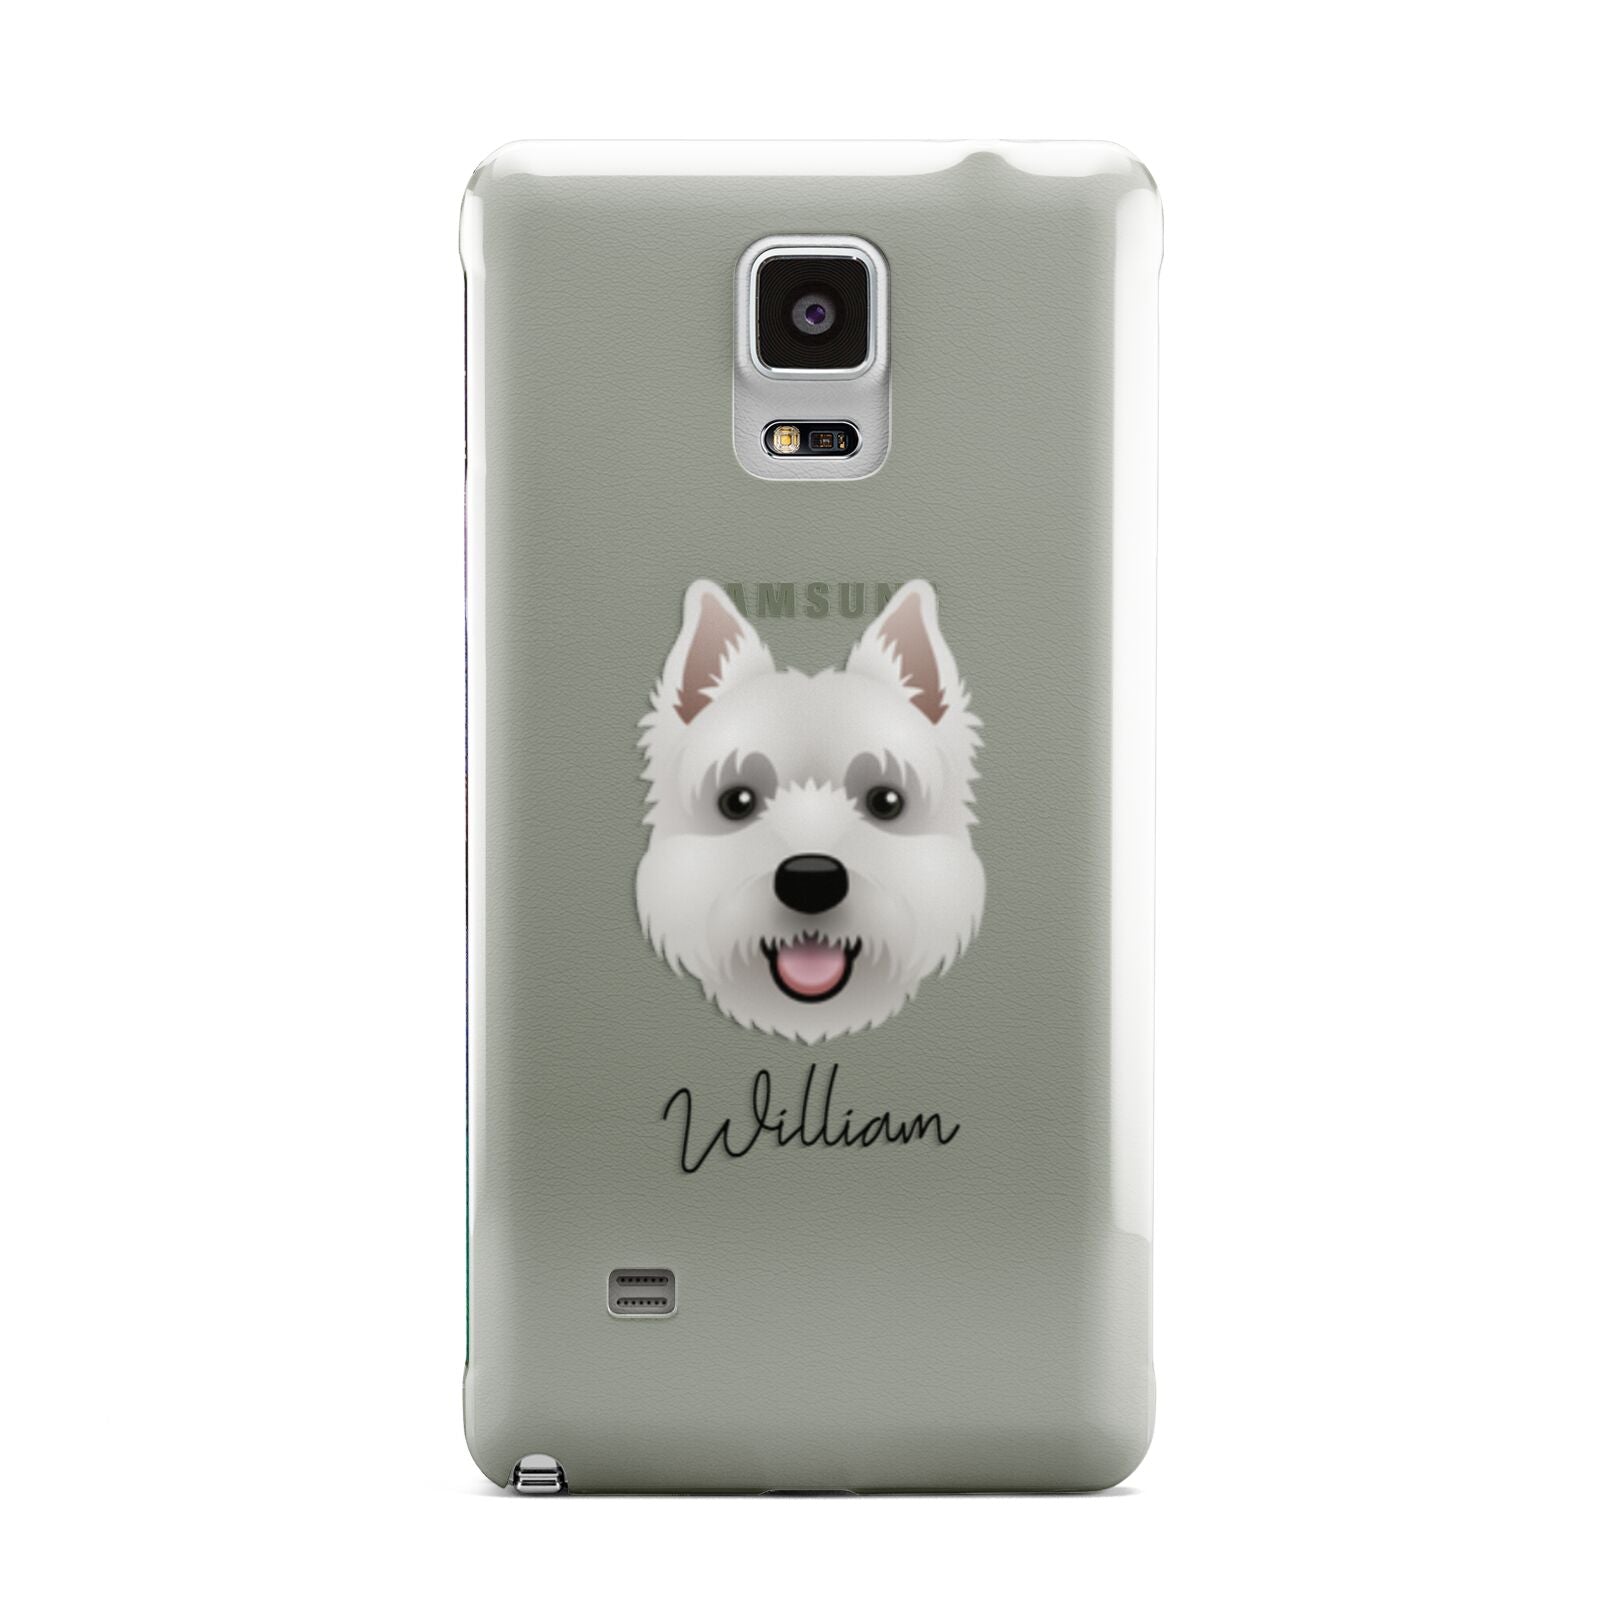 West Highland White Terrier Personalised Samsung Galaxy Note 4 Case